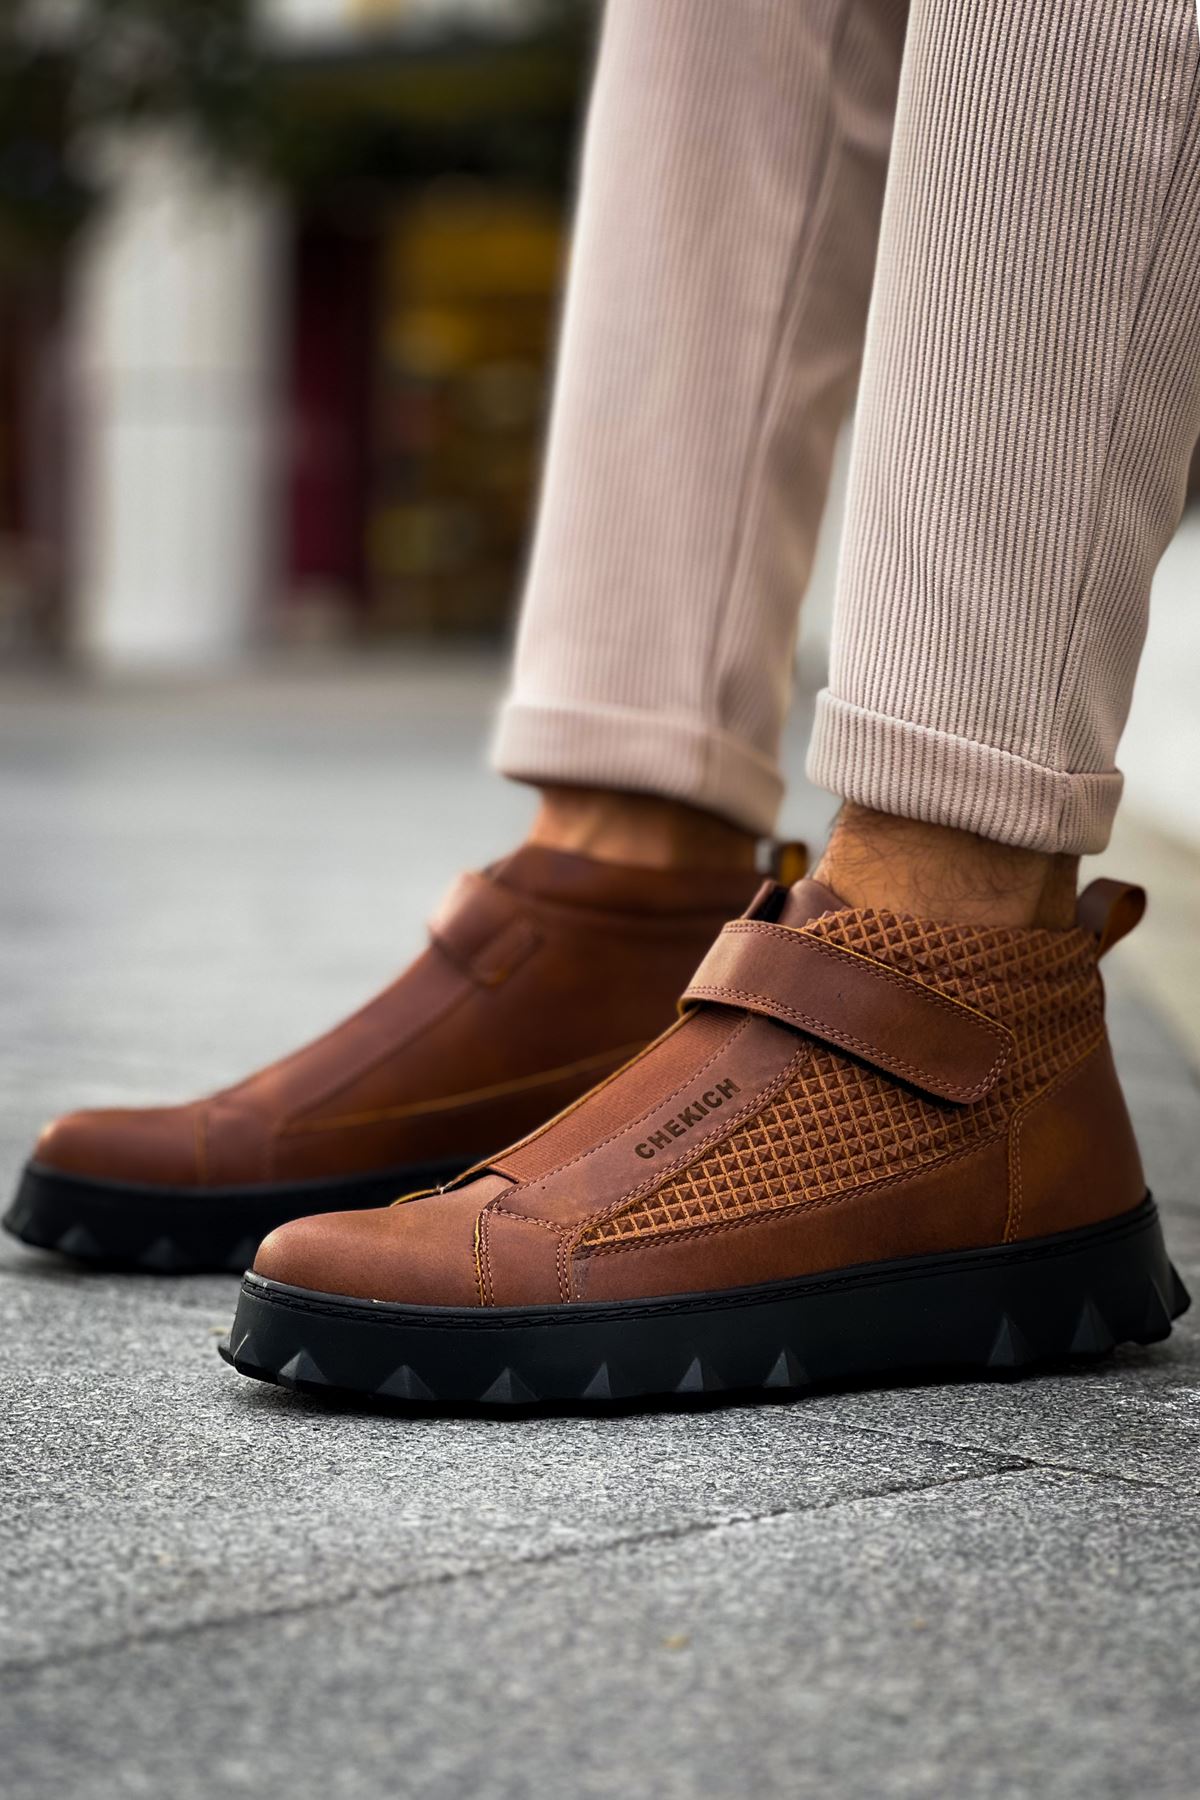 CH103 Men's Brown-Black Sole Casual Sneaker Boots - STREETMODE ™